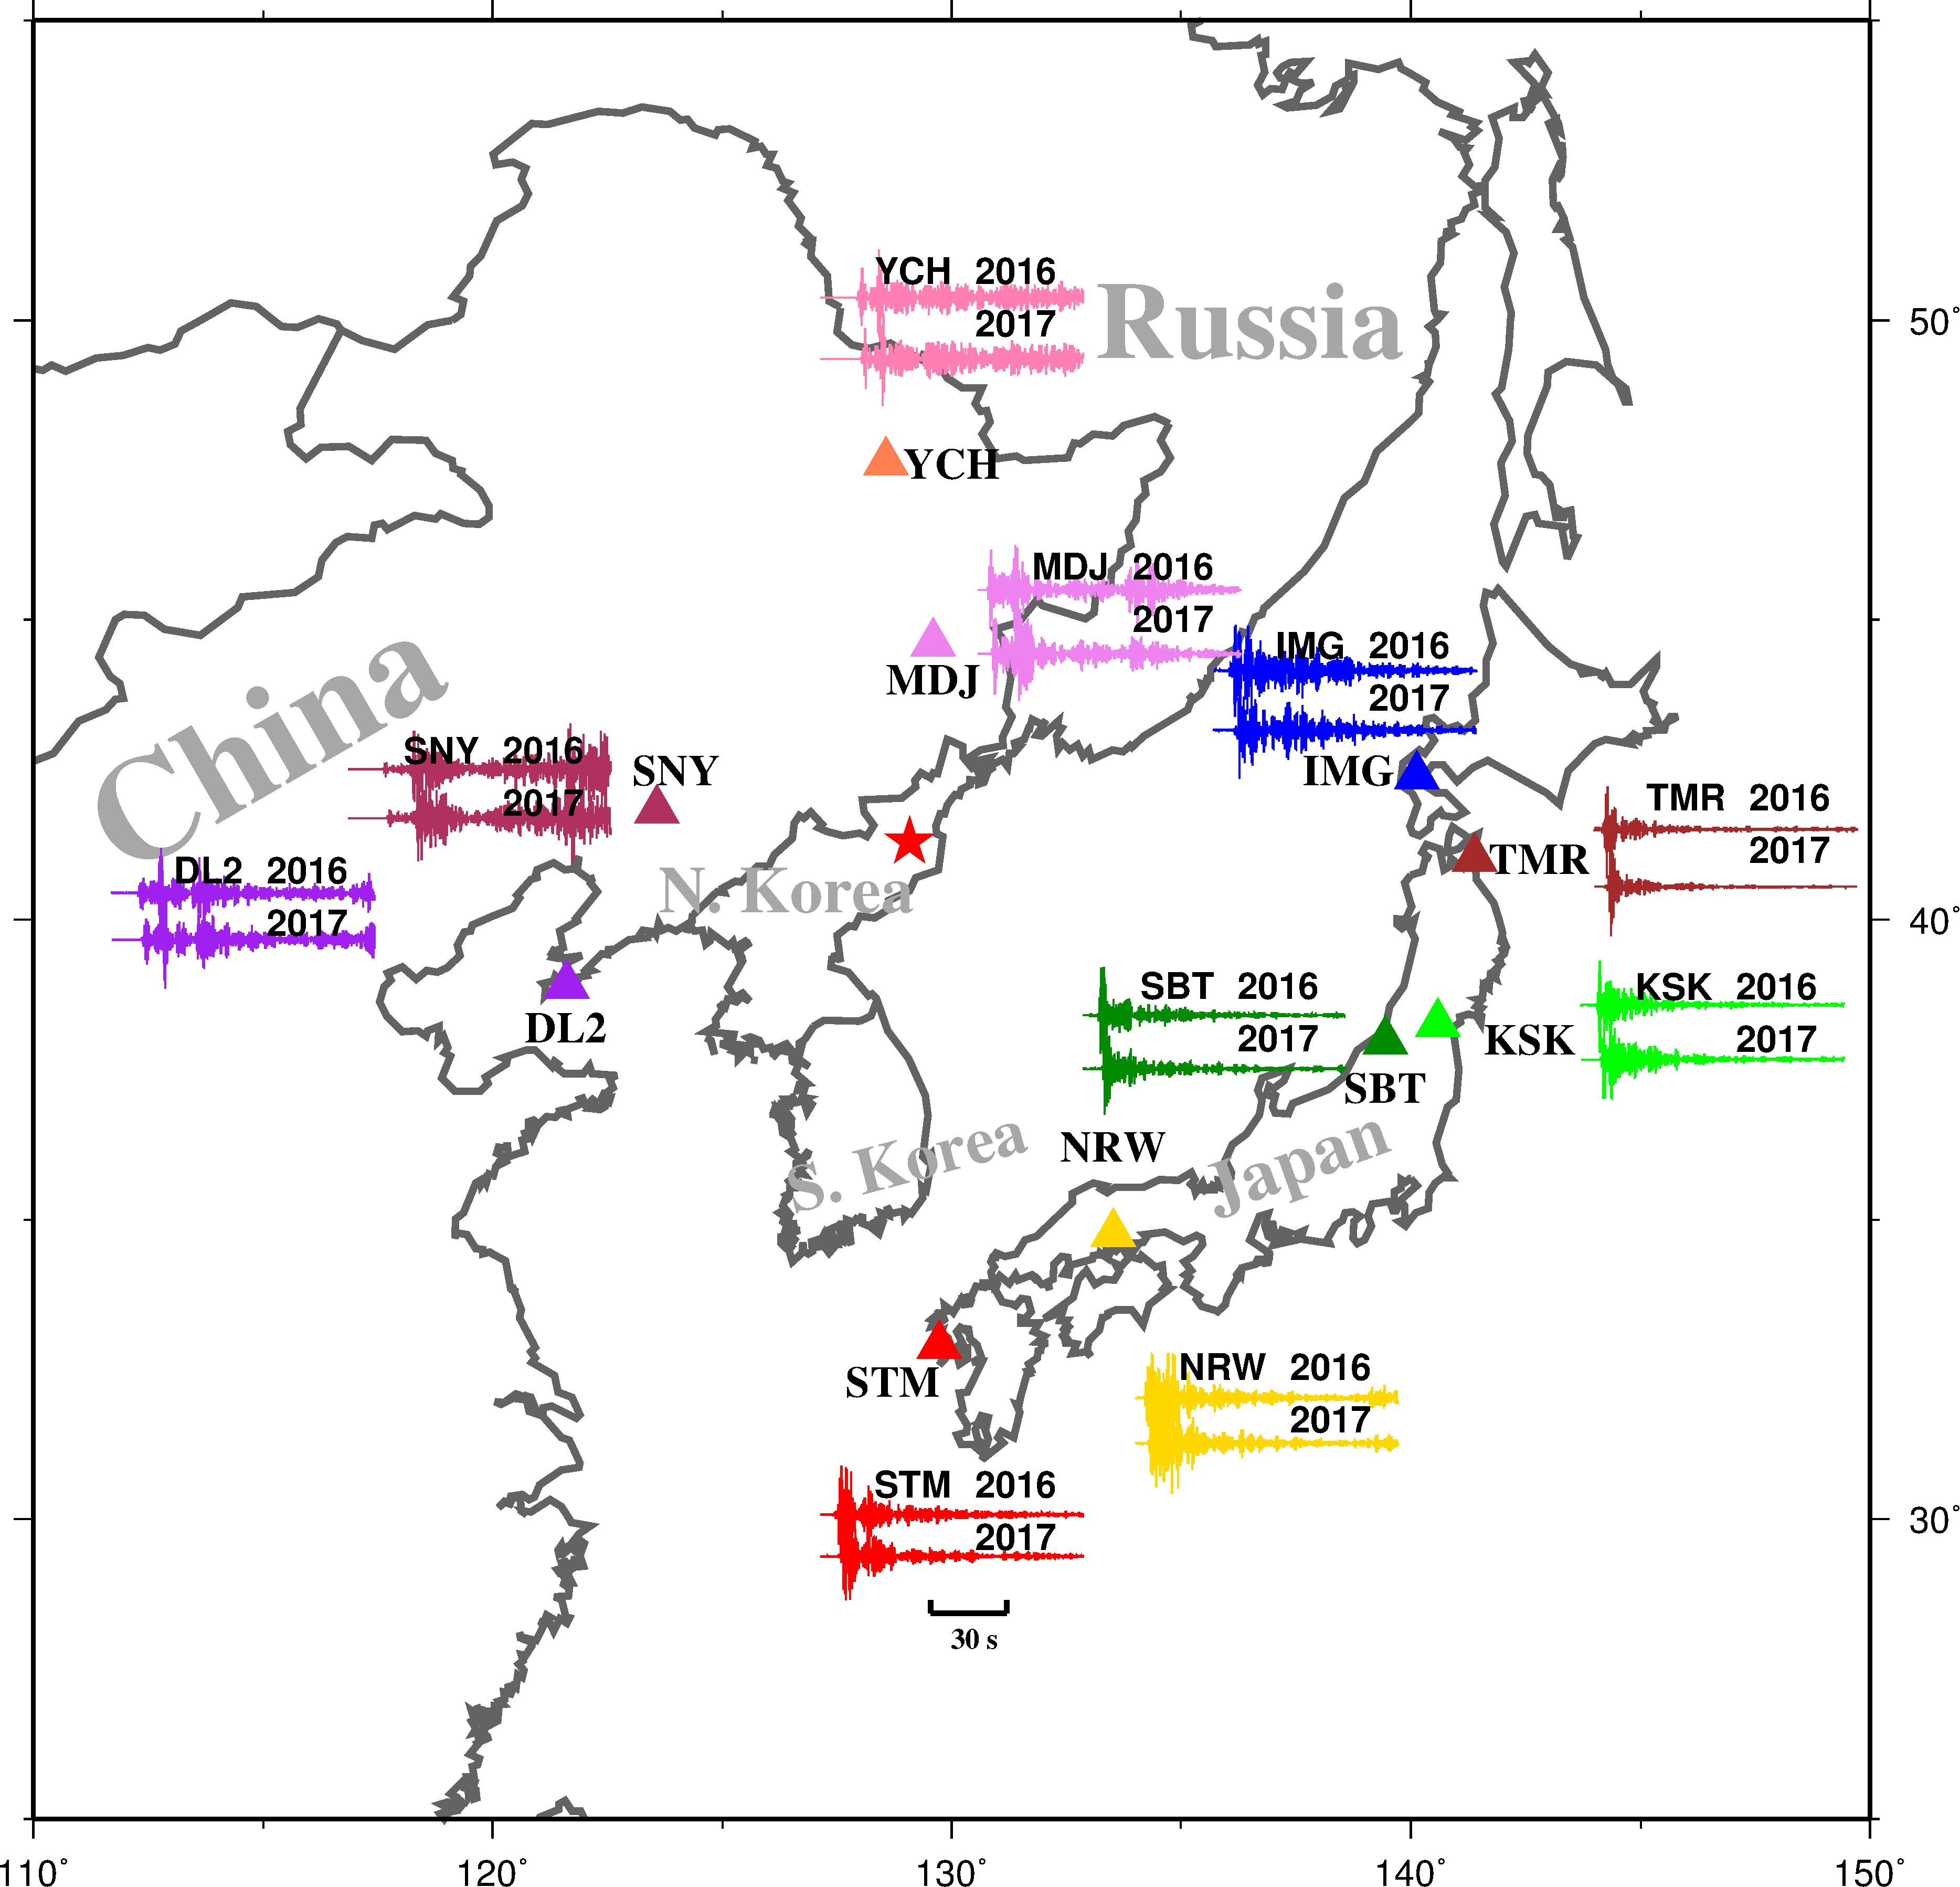 Map showing North Korea’s 2017/09/03 and 2016/09/09 nuclear test sites